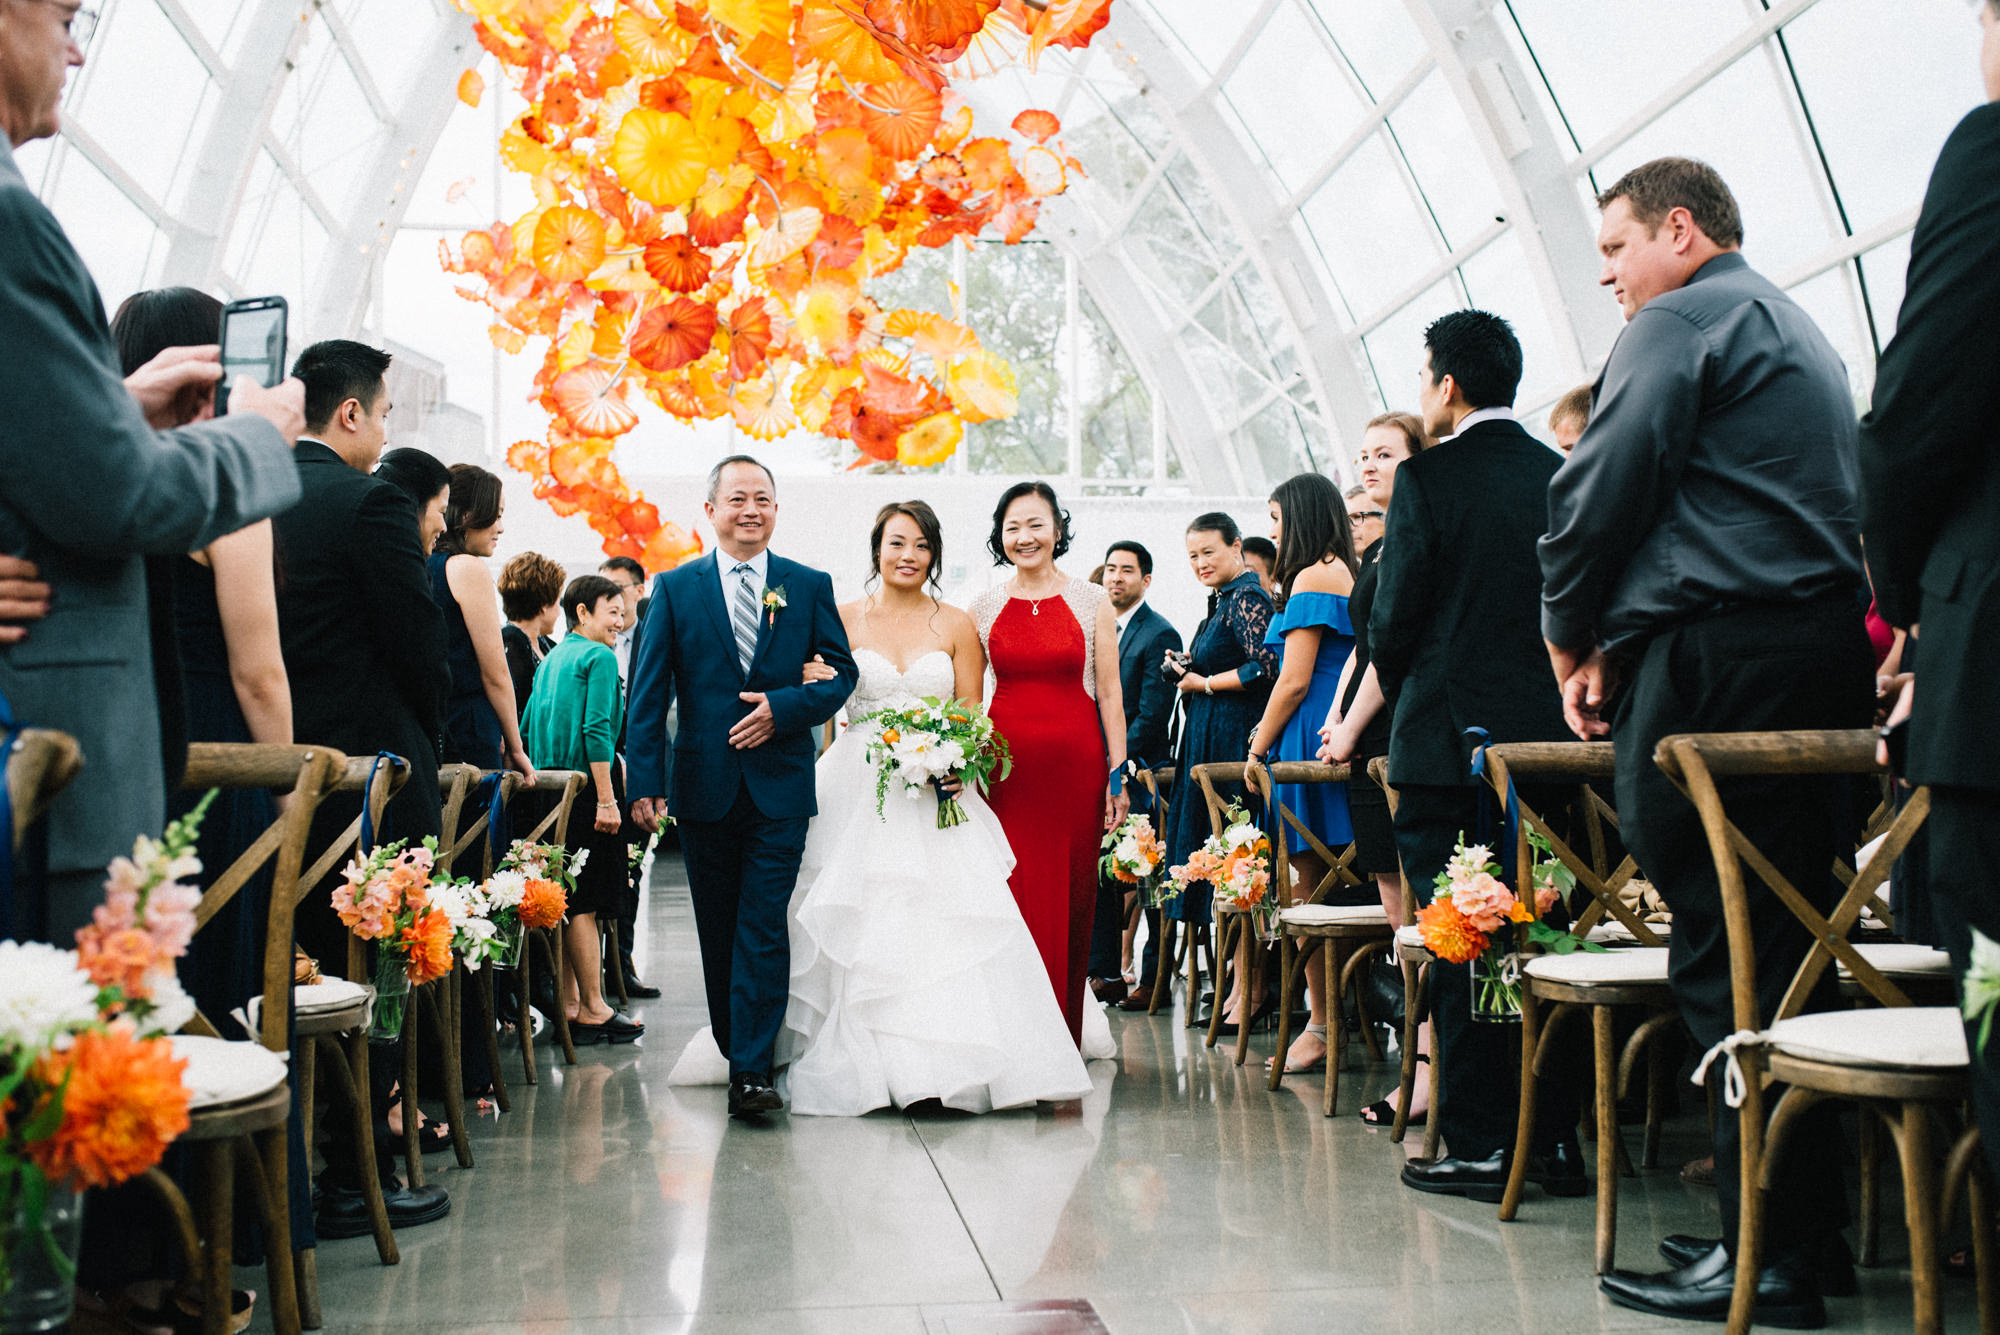 Amy walks down the aisle with her parents at her wedding ceremony at Chihuly Garden and Glass